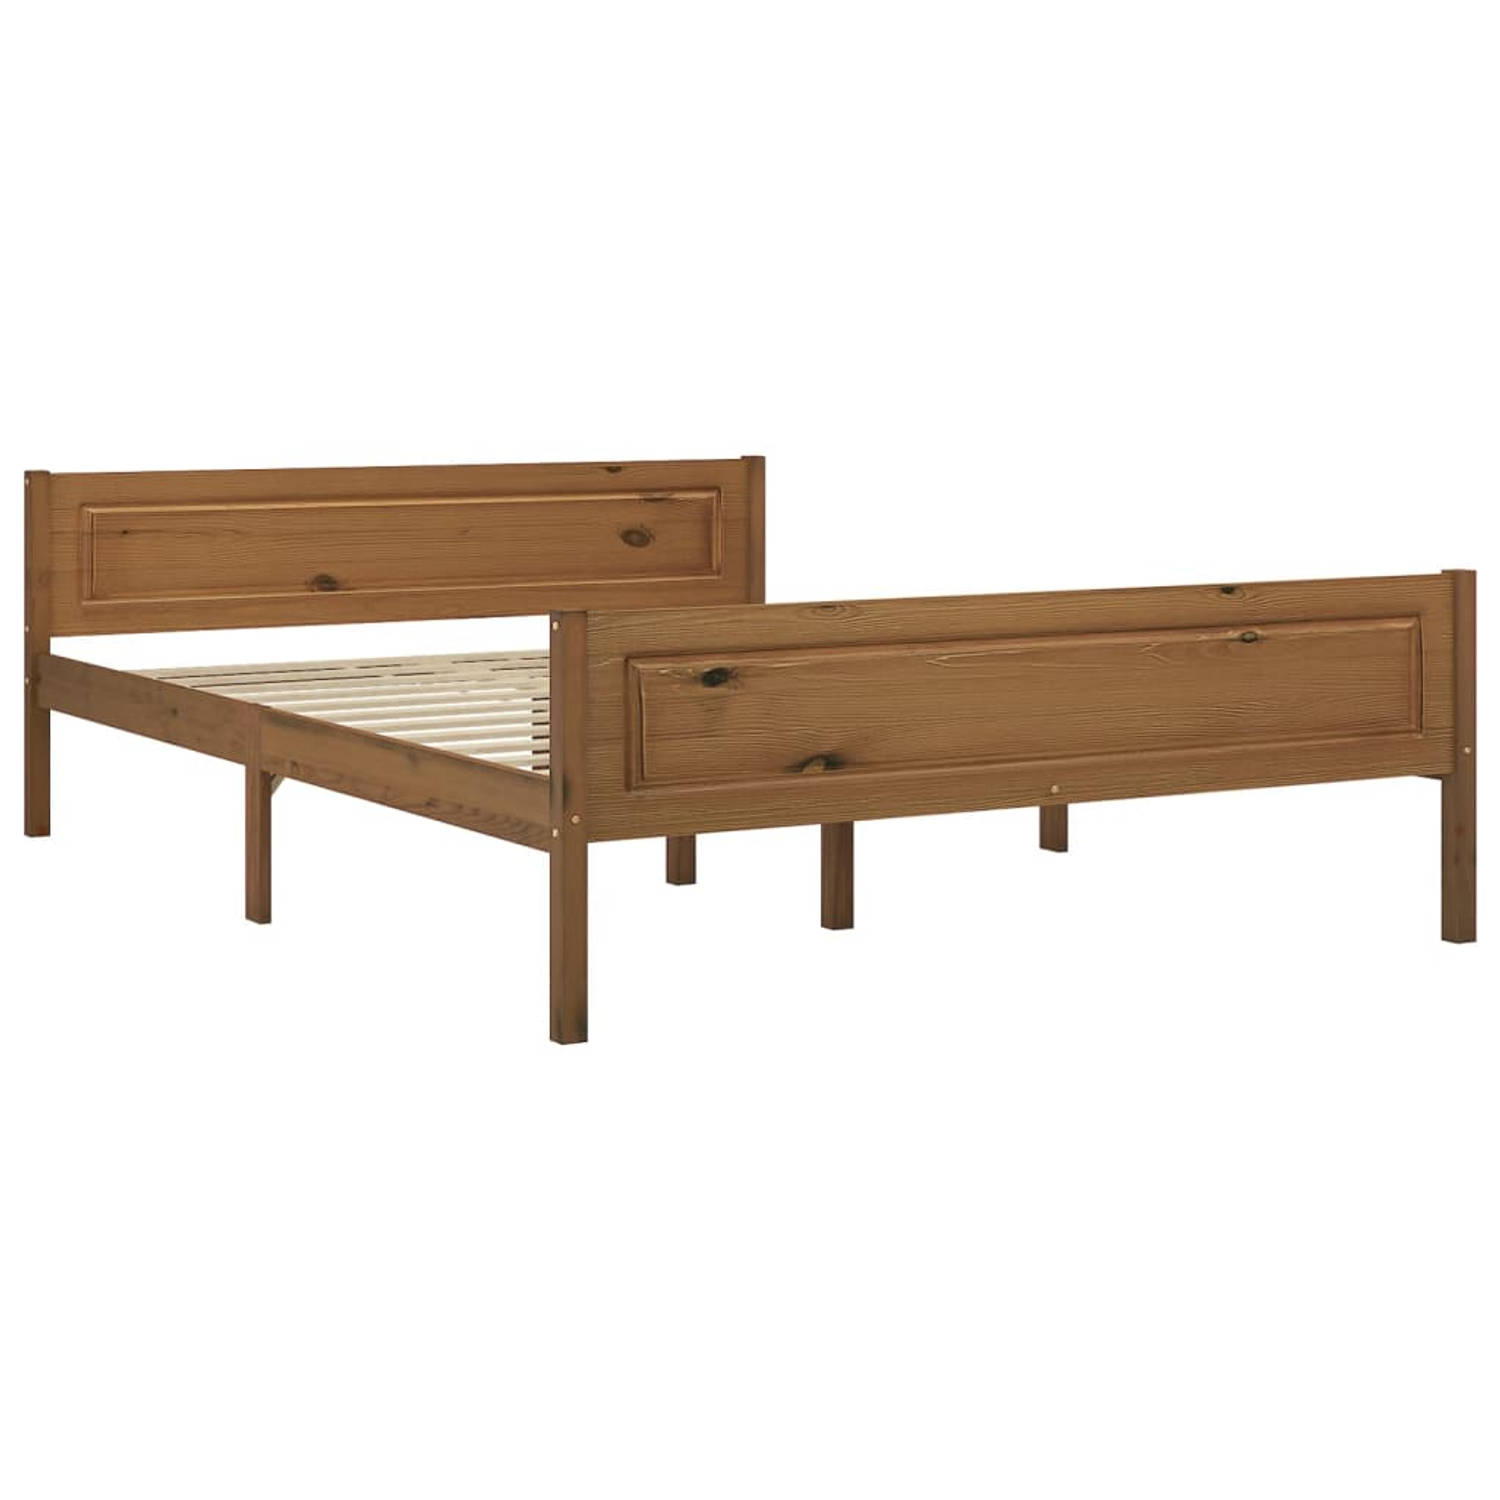 The Living Store Bedframe massief grenenhout honingbruin 140x200 cm - Bedframe - Bedframe - Bed Frame - Bed Frames - Bed - Bedden - 2-persoonsbed - 2-persoonsbedden - Tweepersoons